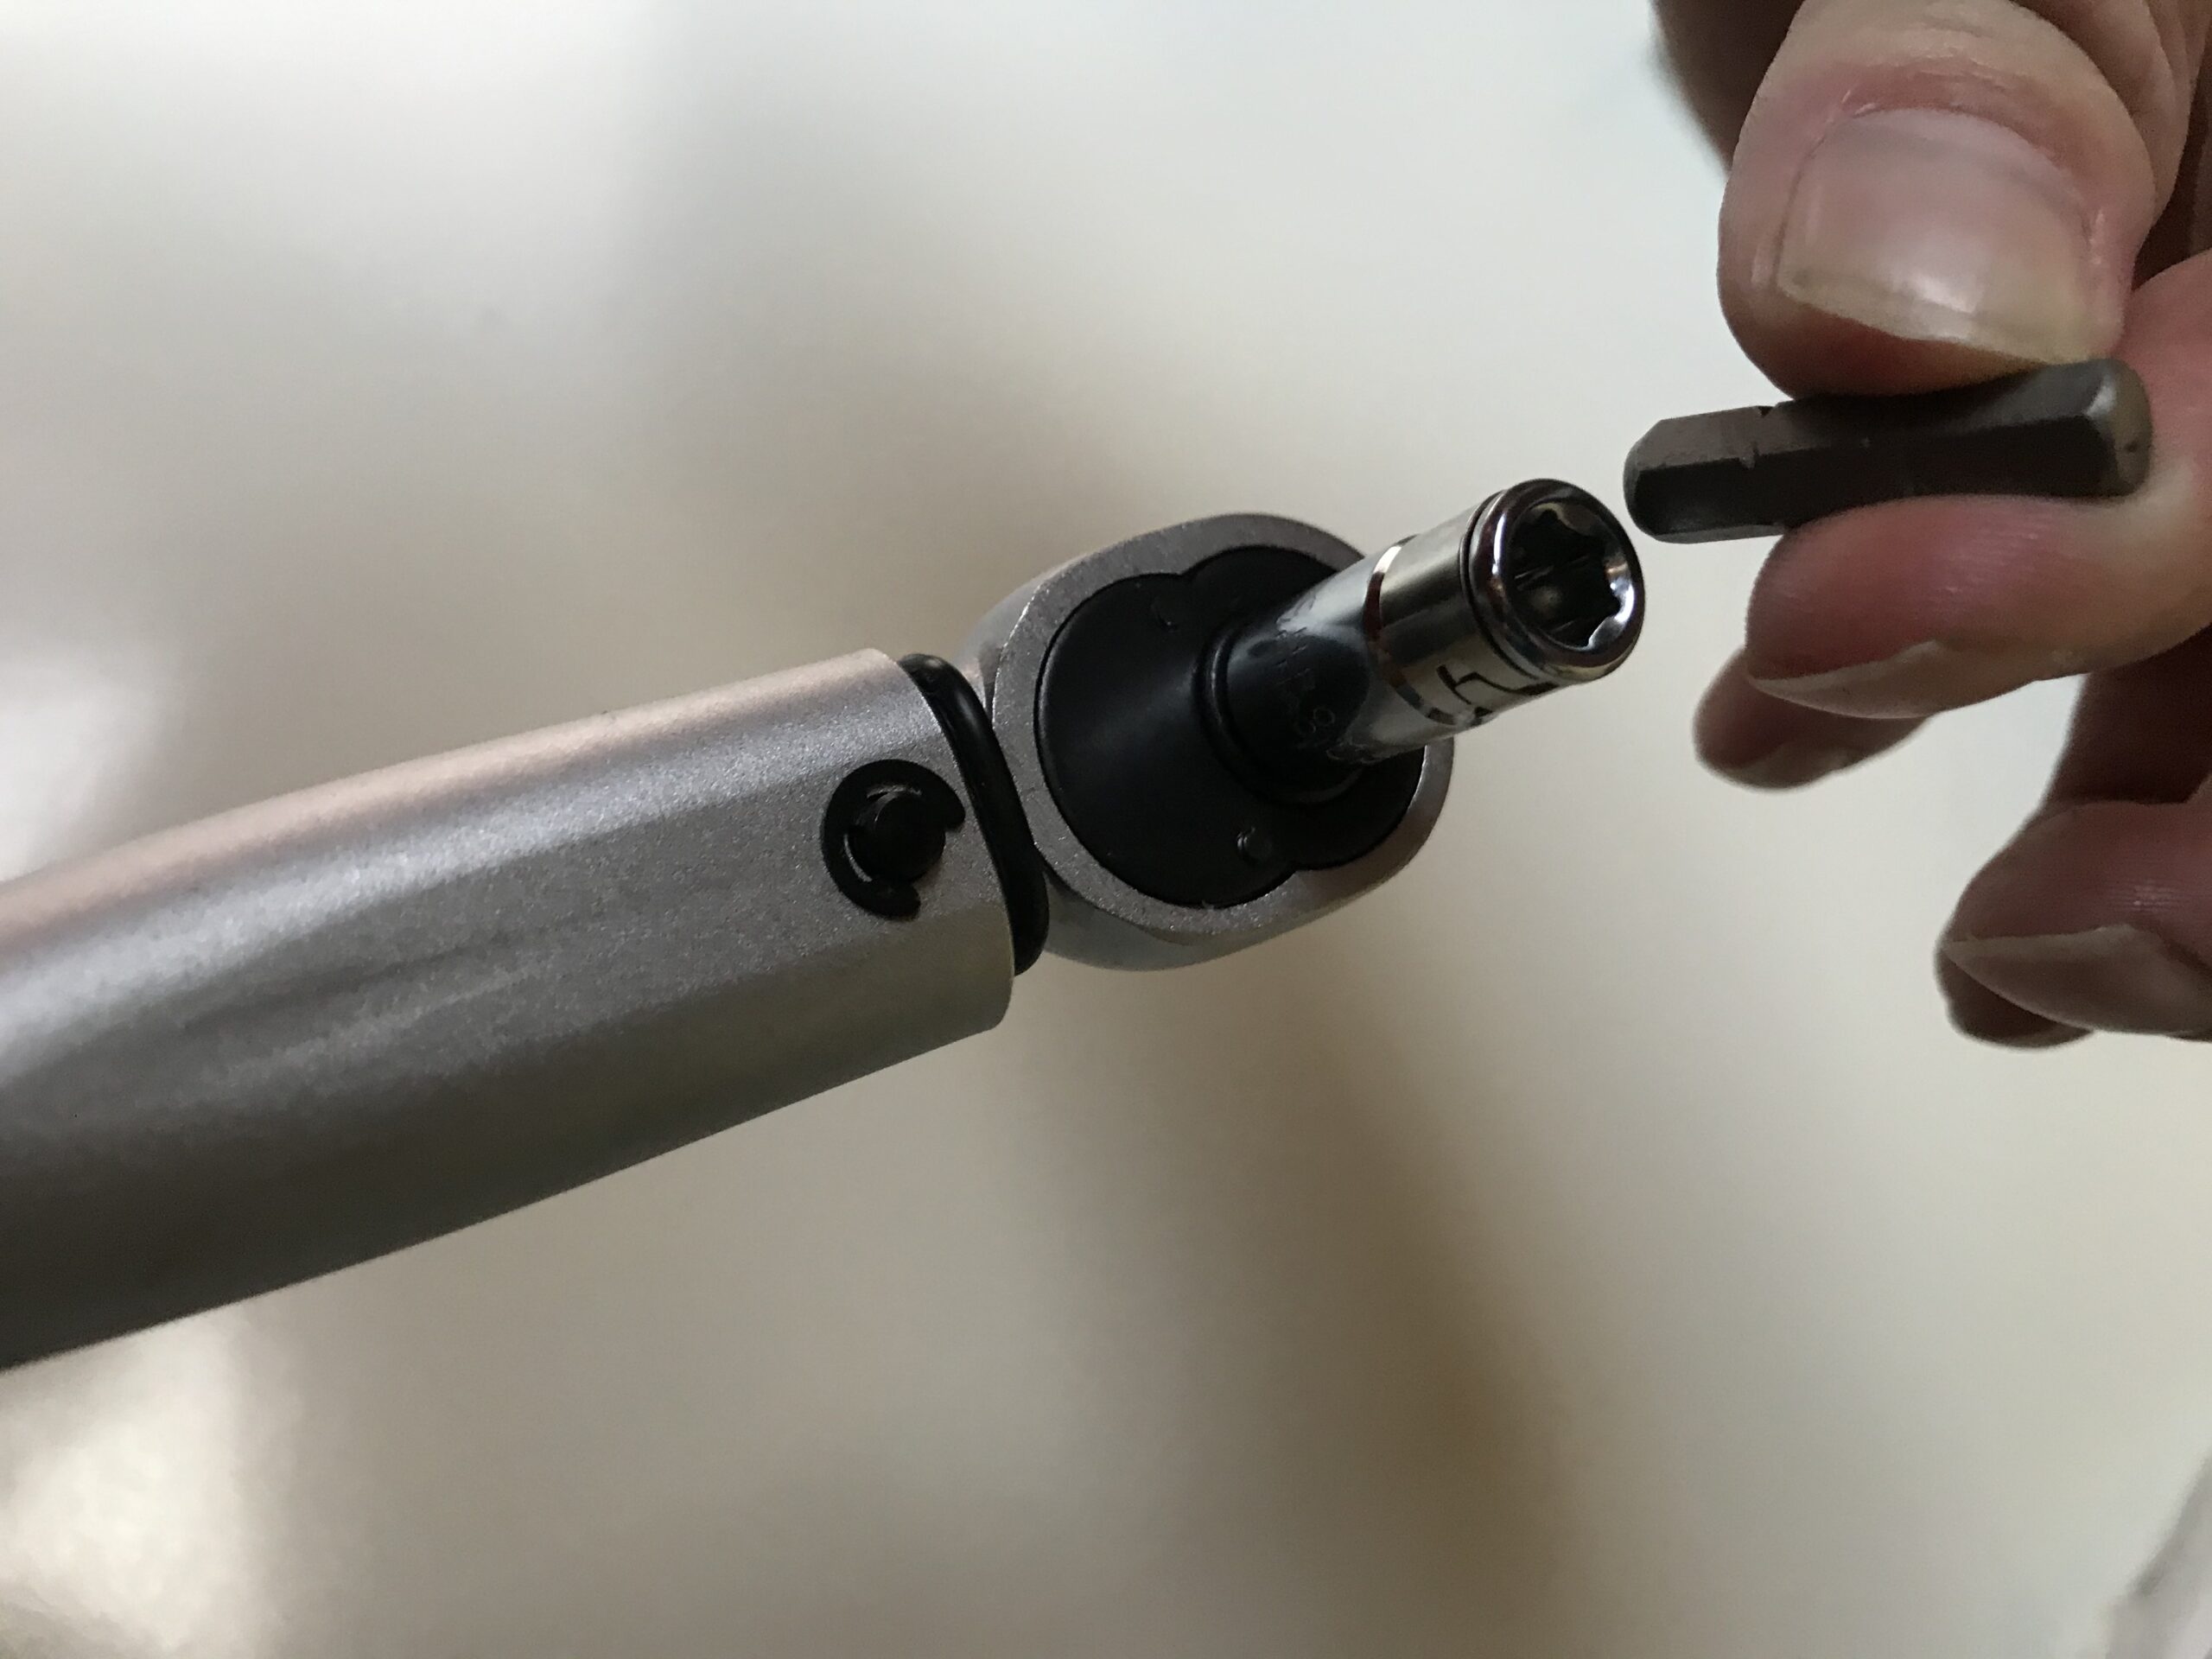 How to use a torque wrench on a bike